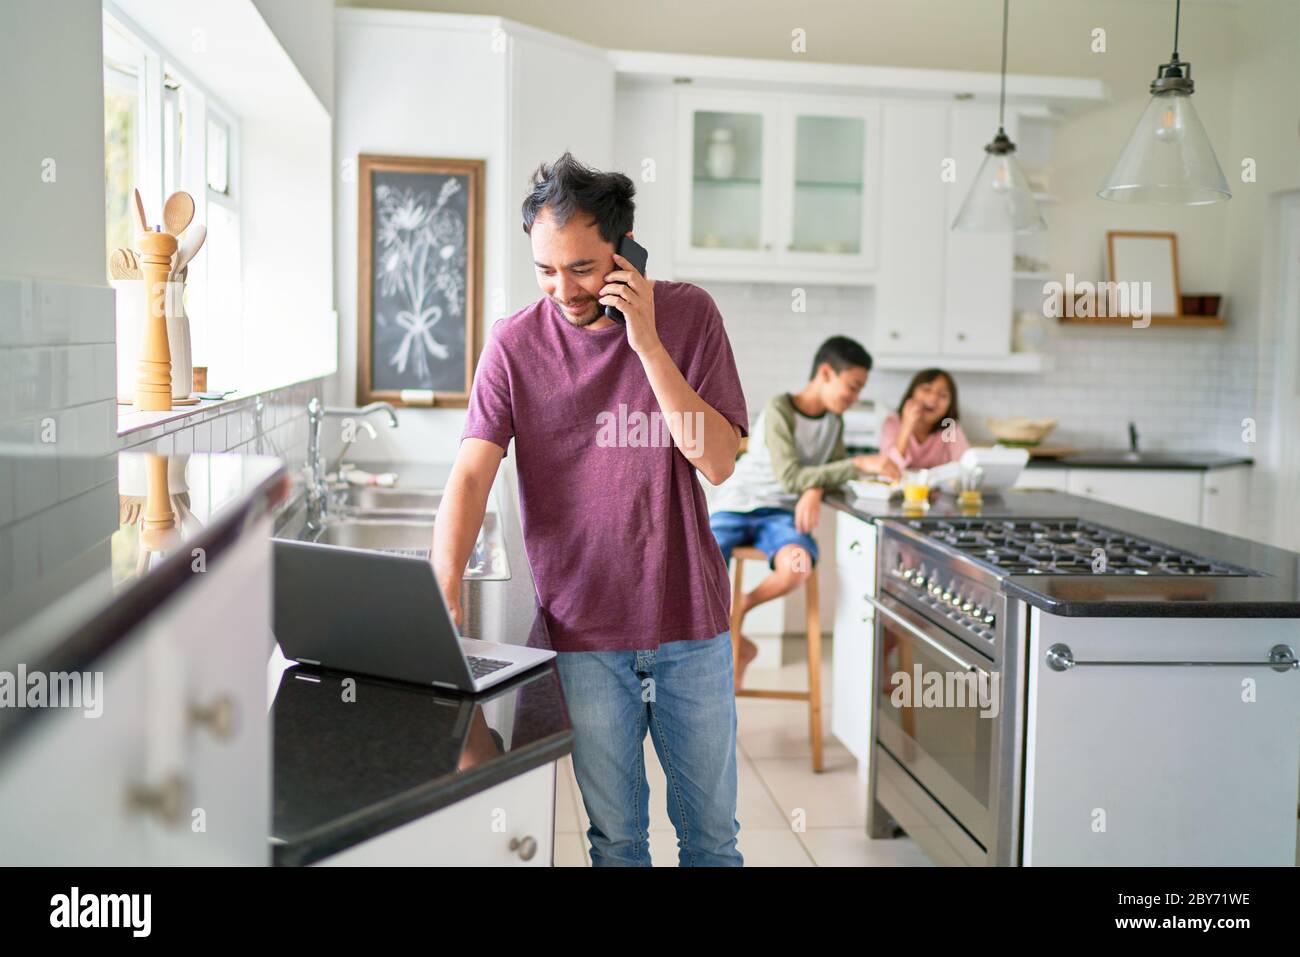 Man working at laptop in kitchen with kids eating Stock Photo